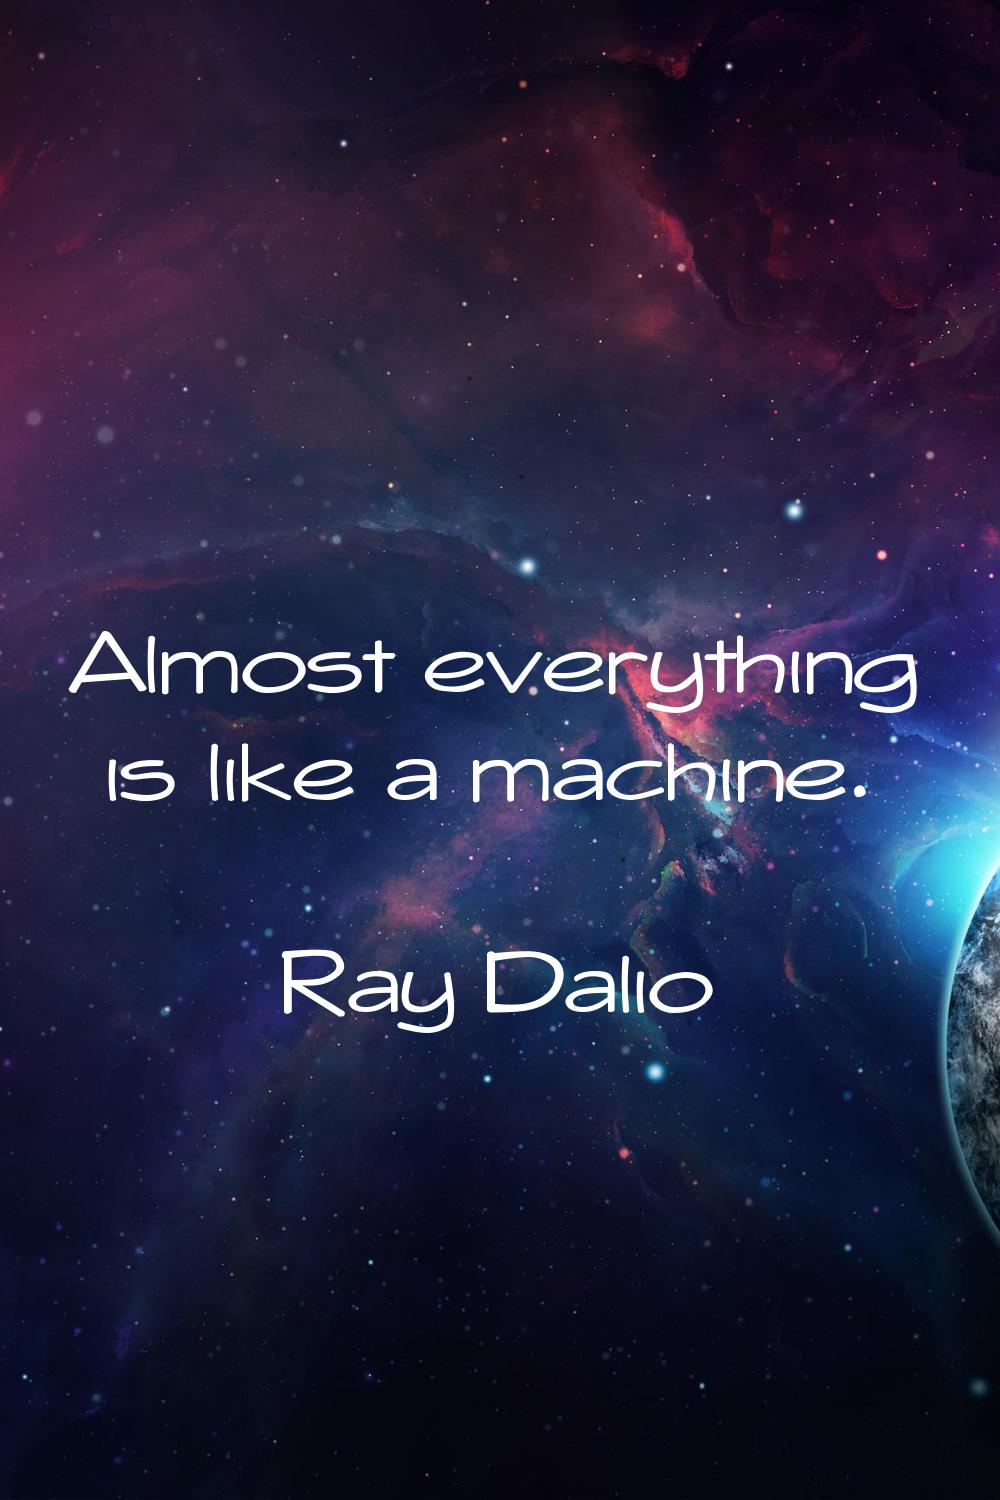 Almost everything is like a machine.